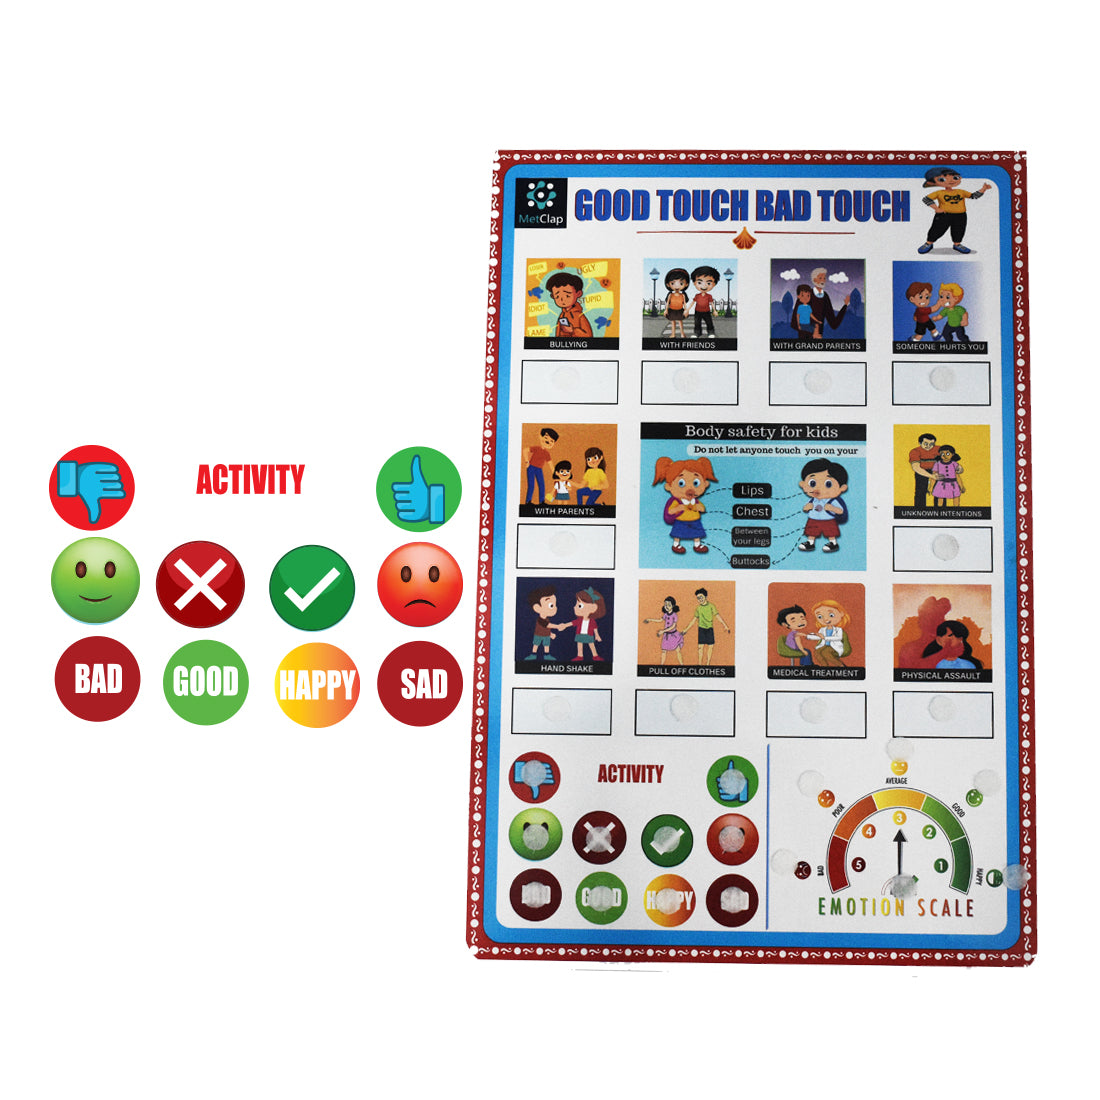 Good Touch Bad Touch Activity Board Game for Kids